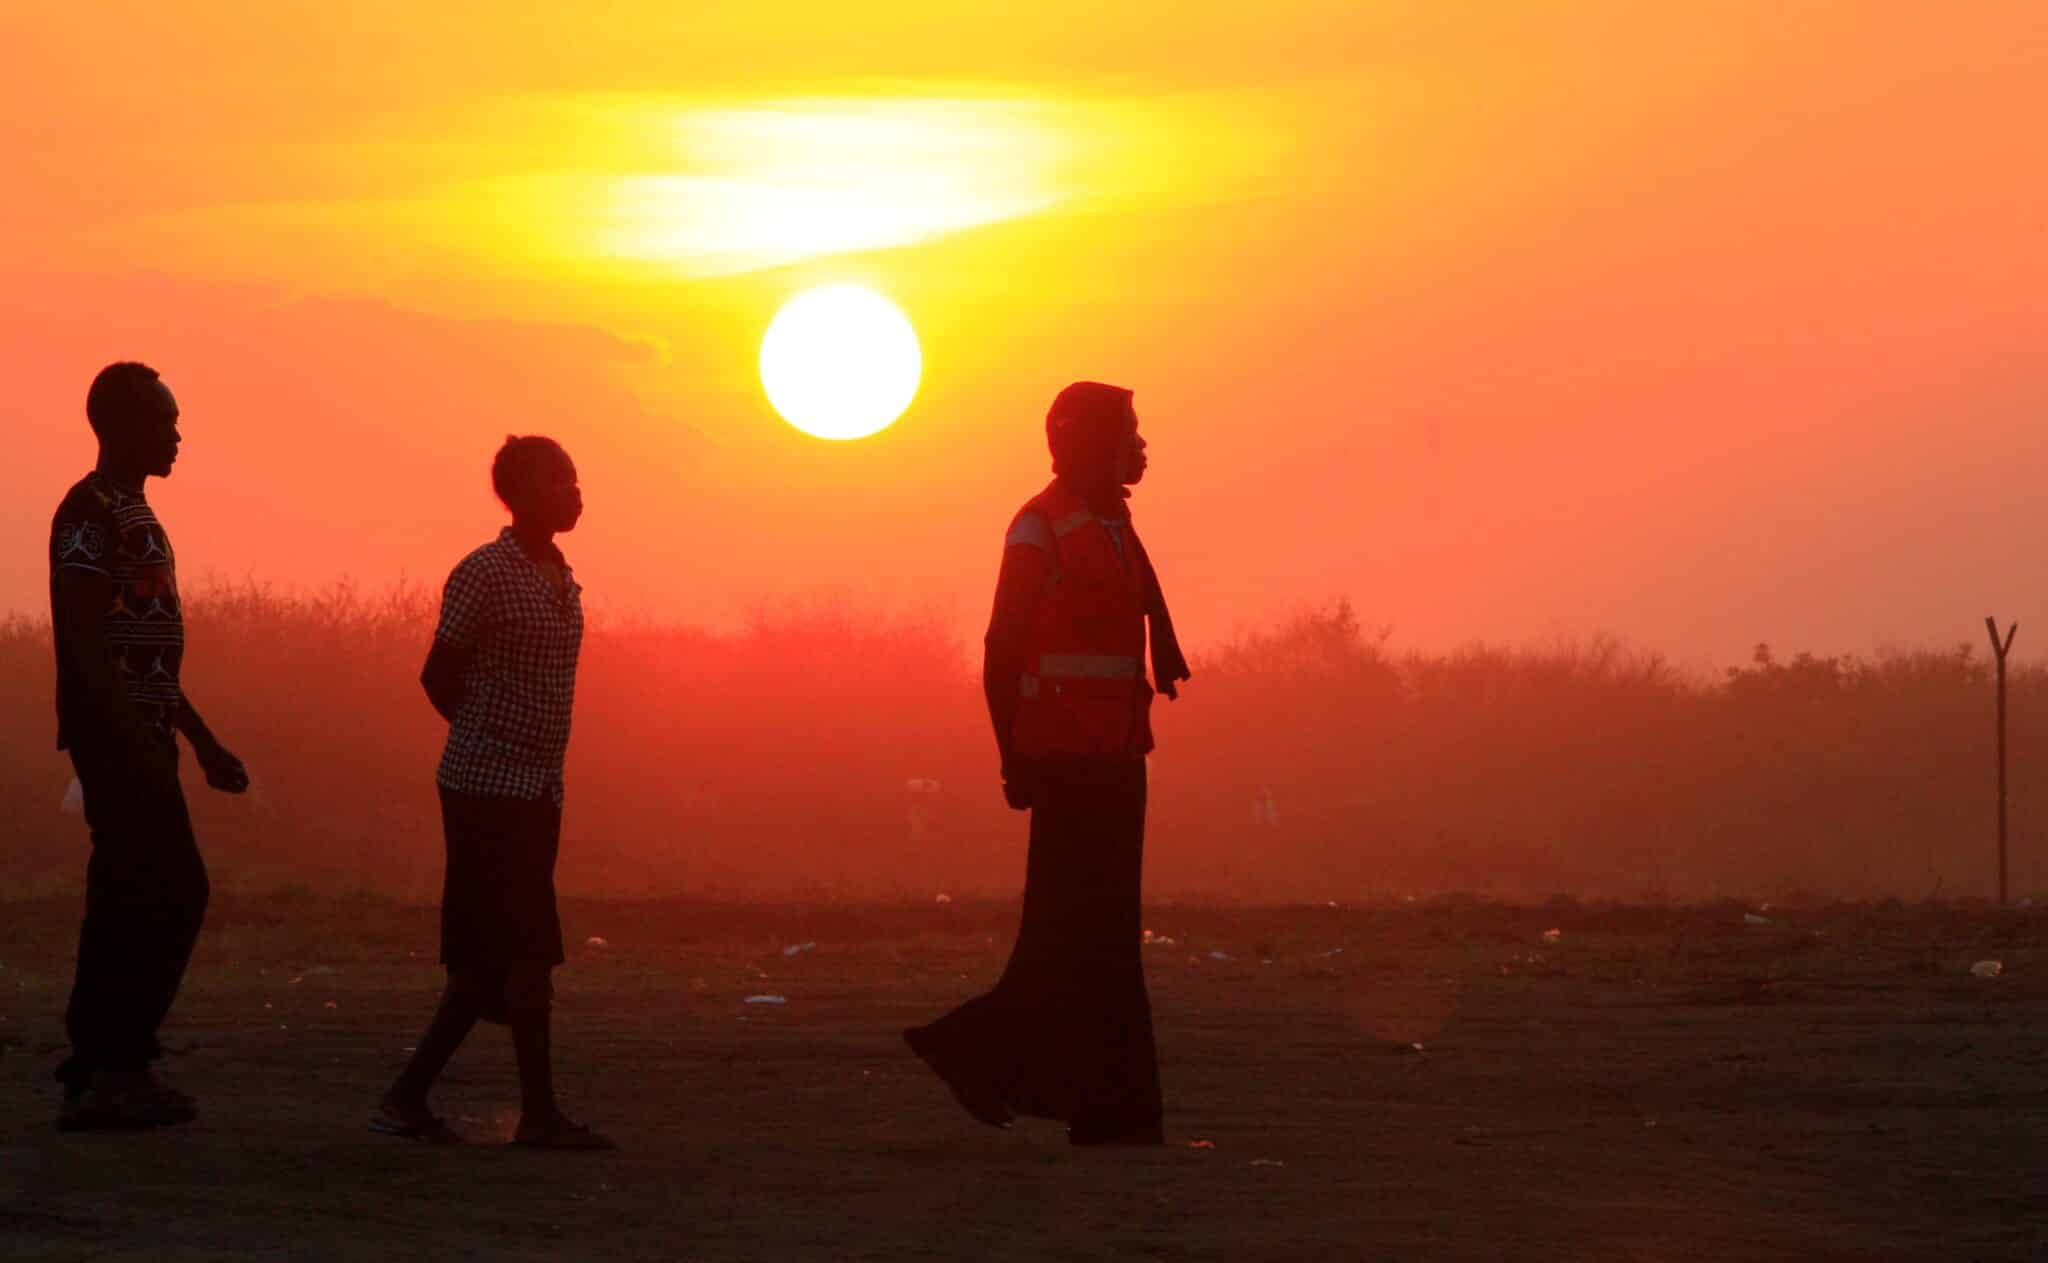 People who fled fighting in South Sudan are seen in a file photo walking at sunset on arrival at Bidi Bidi refugee camp near the border with South Sudan, in Yumbe, Uganda. (OSV News photo/James Akena, Reuters)